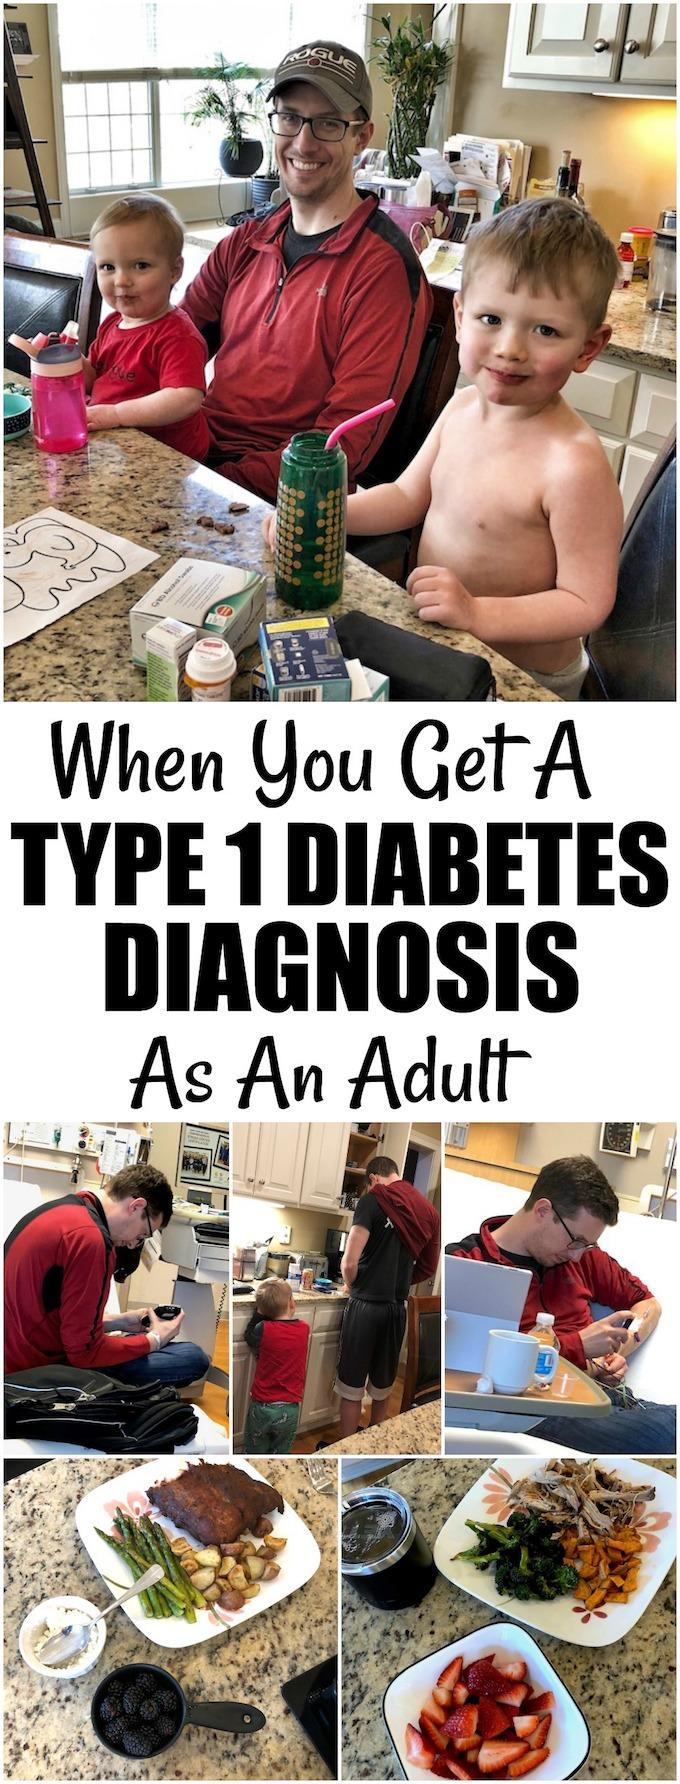 Yes, you can get Type 1 diabetes as an adult. My husband's diagnosis at age 33 had a huge effect on our family, but with a positive attitude and a lot of trial and error, you can find your new normal and live life to the fullest!